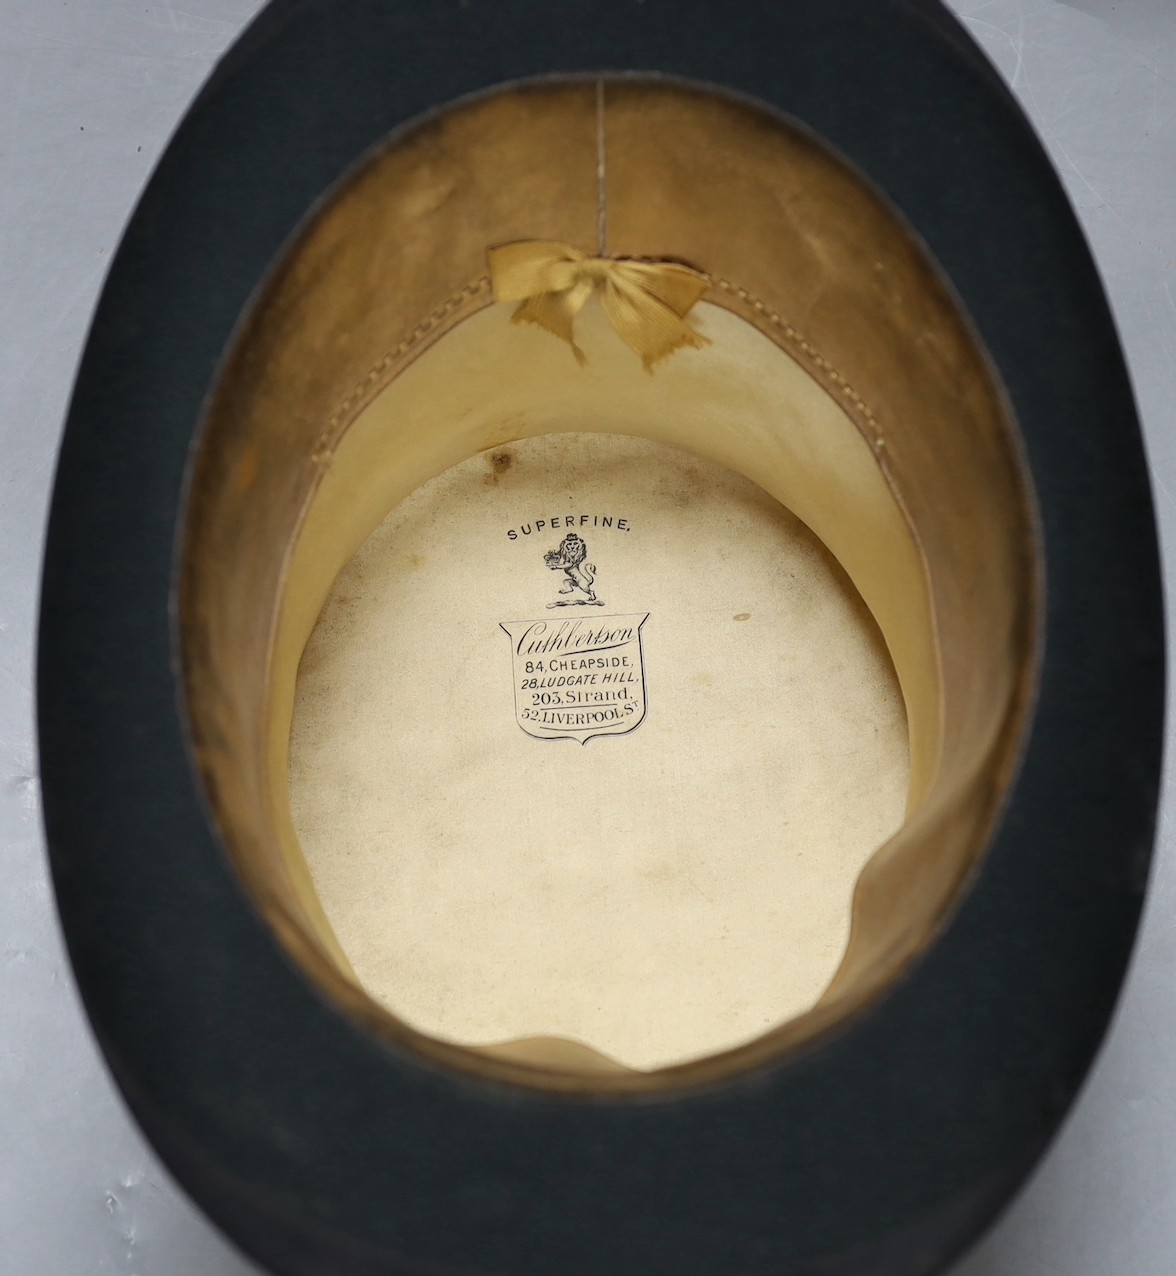 A leather cased Cuthbertson top hat, 19.5x15.5cm